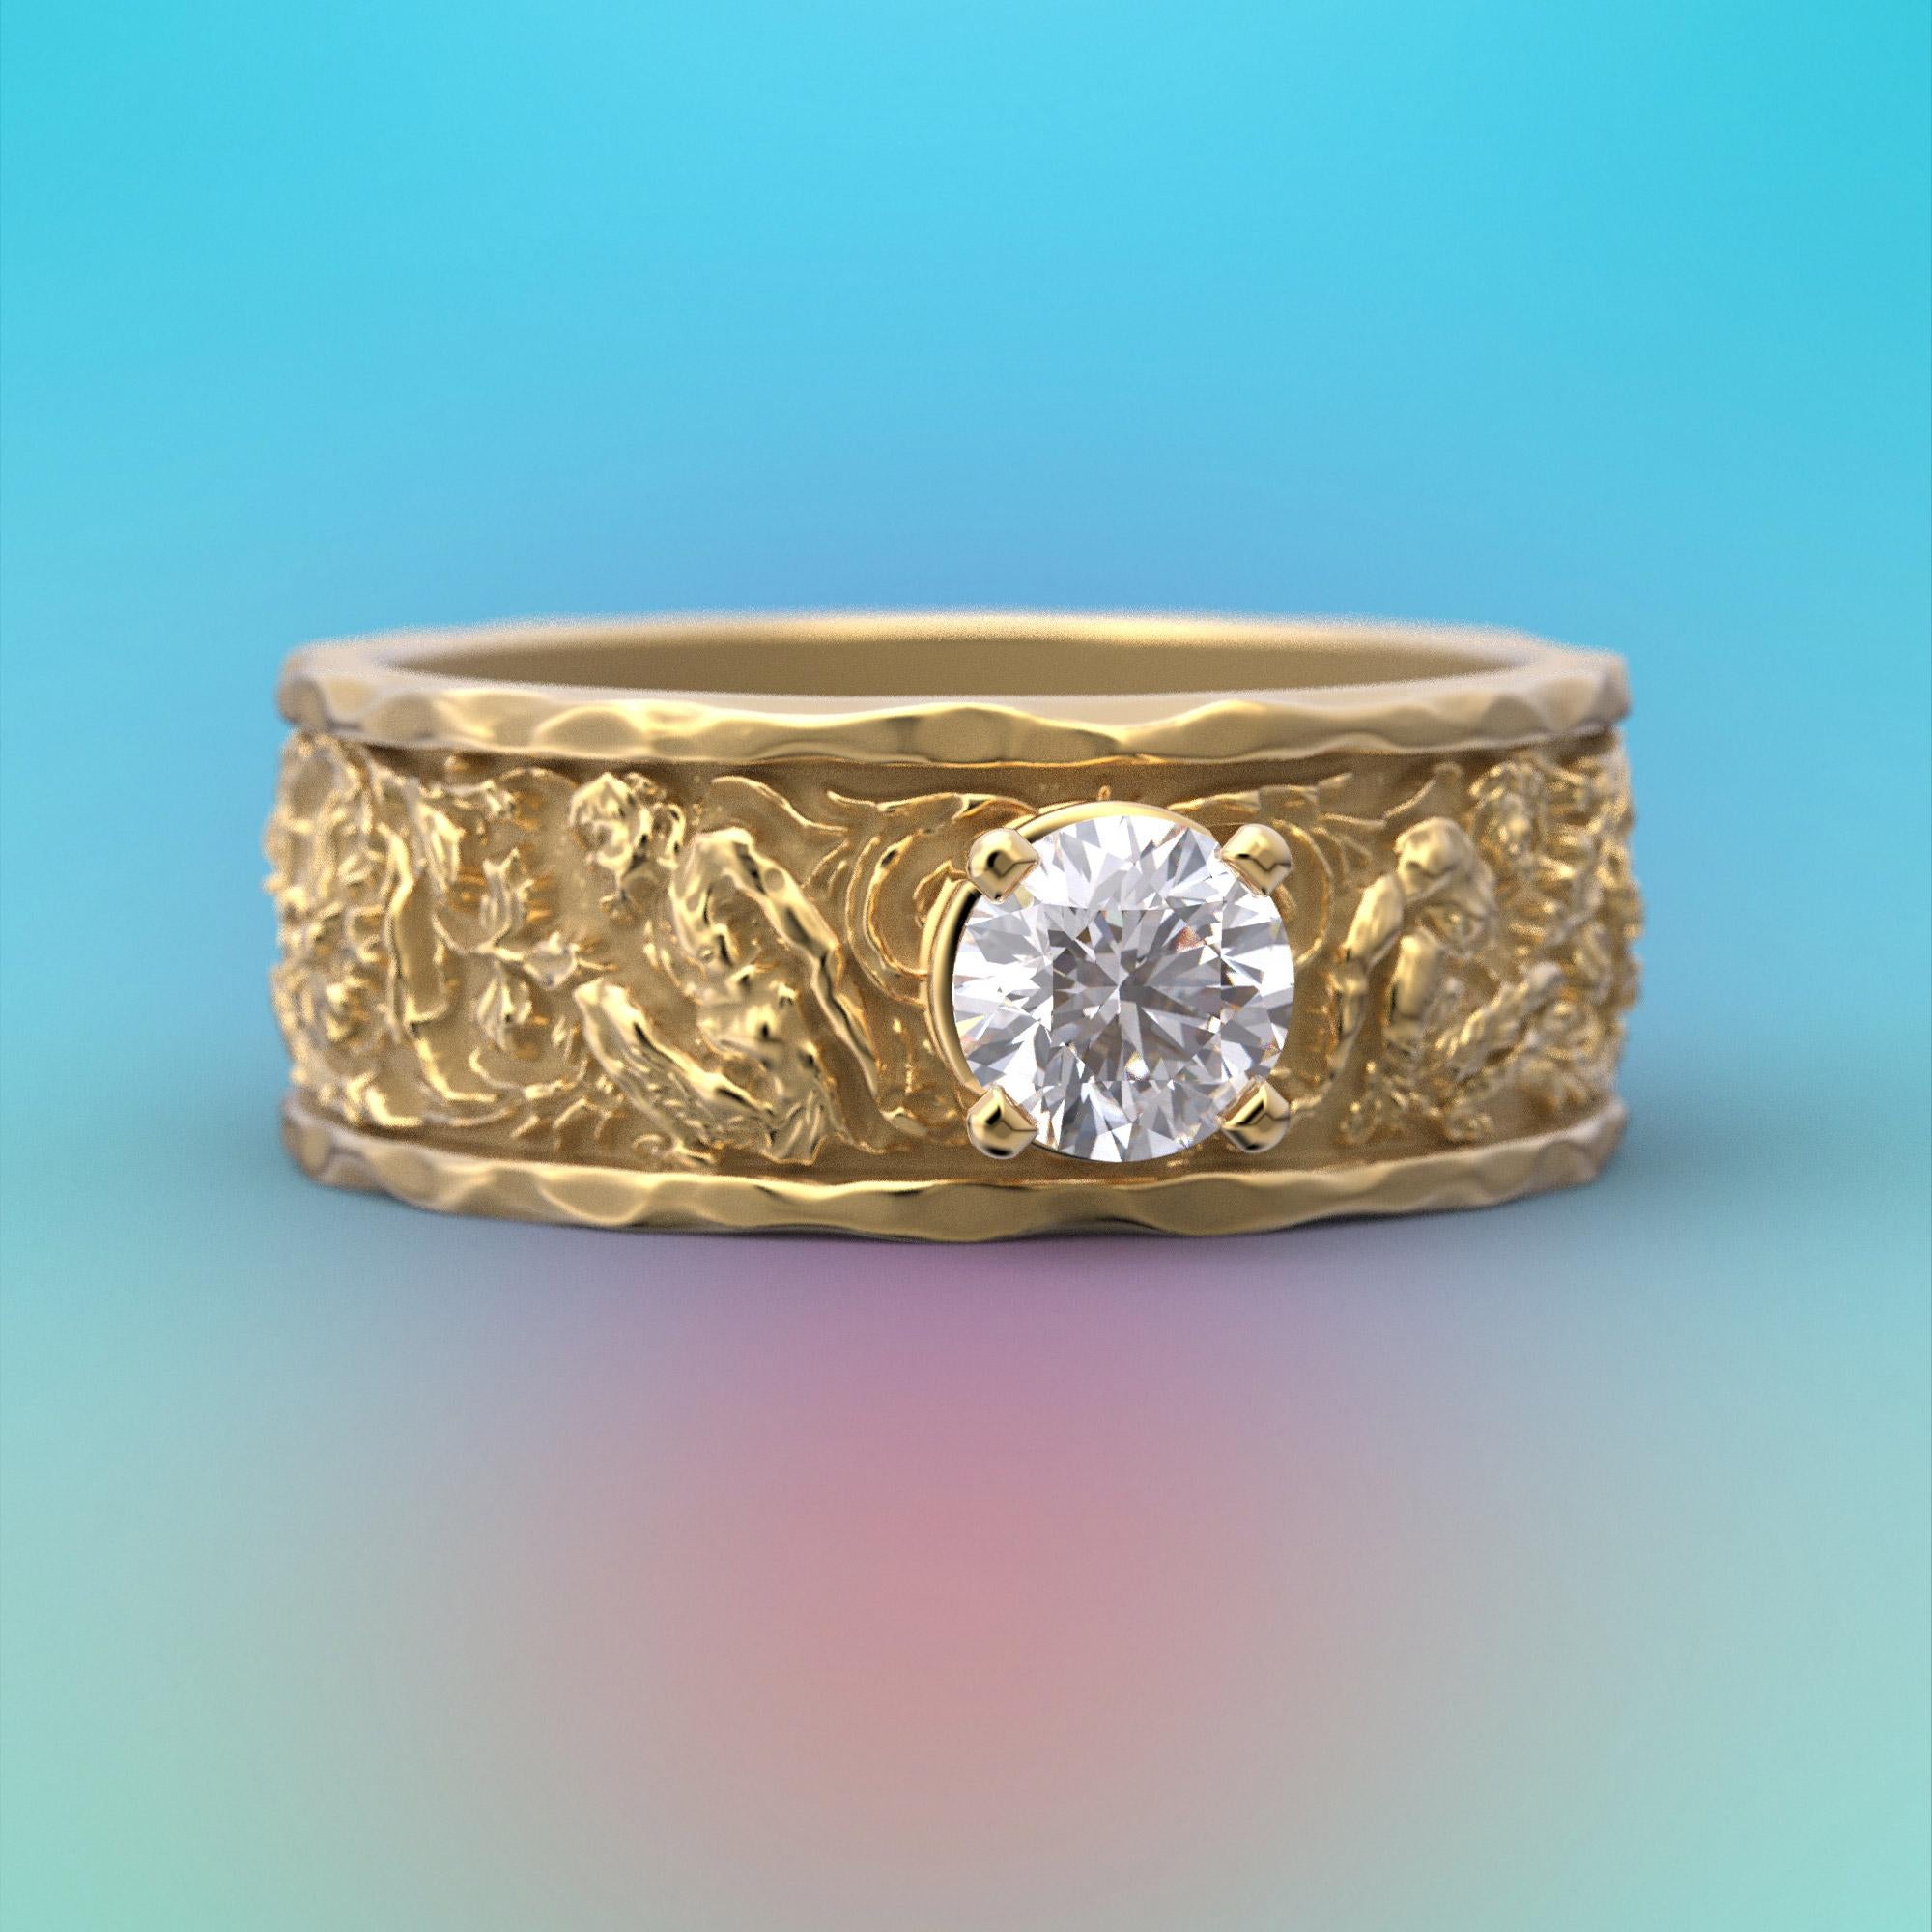 For Sale:  Half Carat Diamond Men's Gold Band in 14k Gold, Designed and Crafted in Italy 2